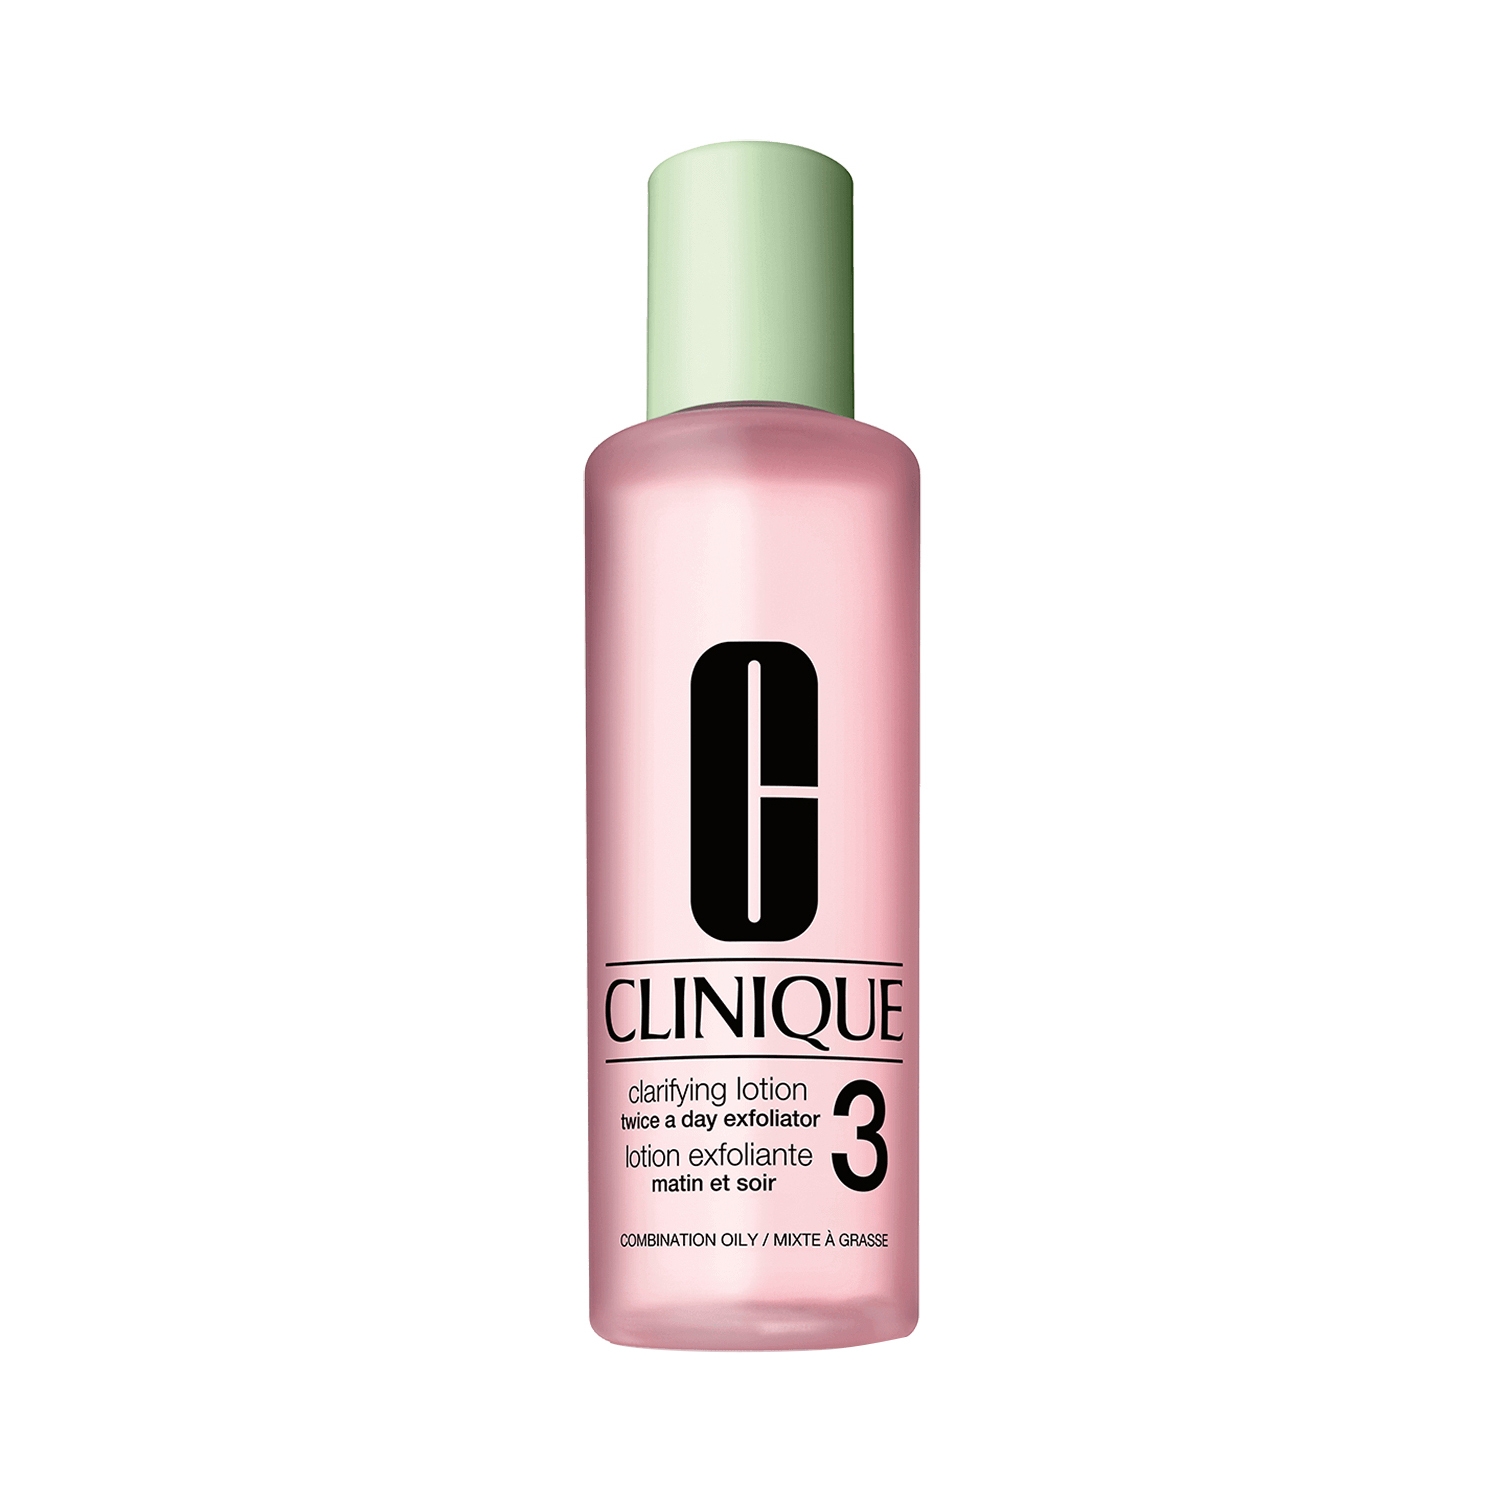 CLINIQUE | CLINIQUE Clarifying Lotion Twice A Day Exfoliator 3 (60ml)